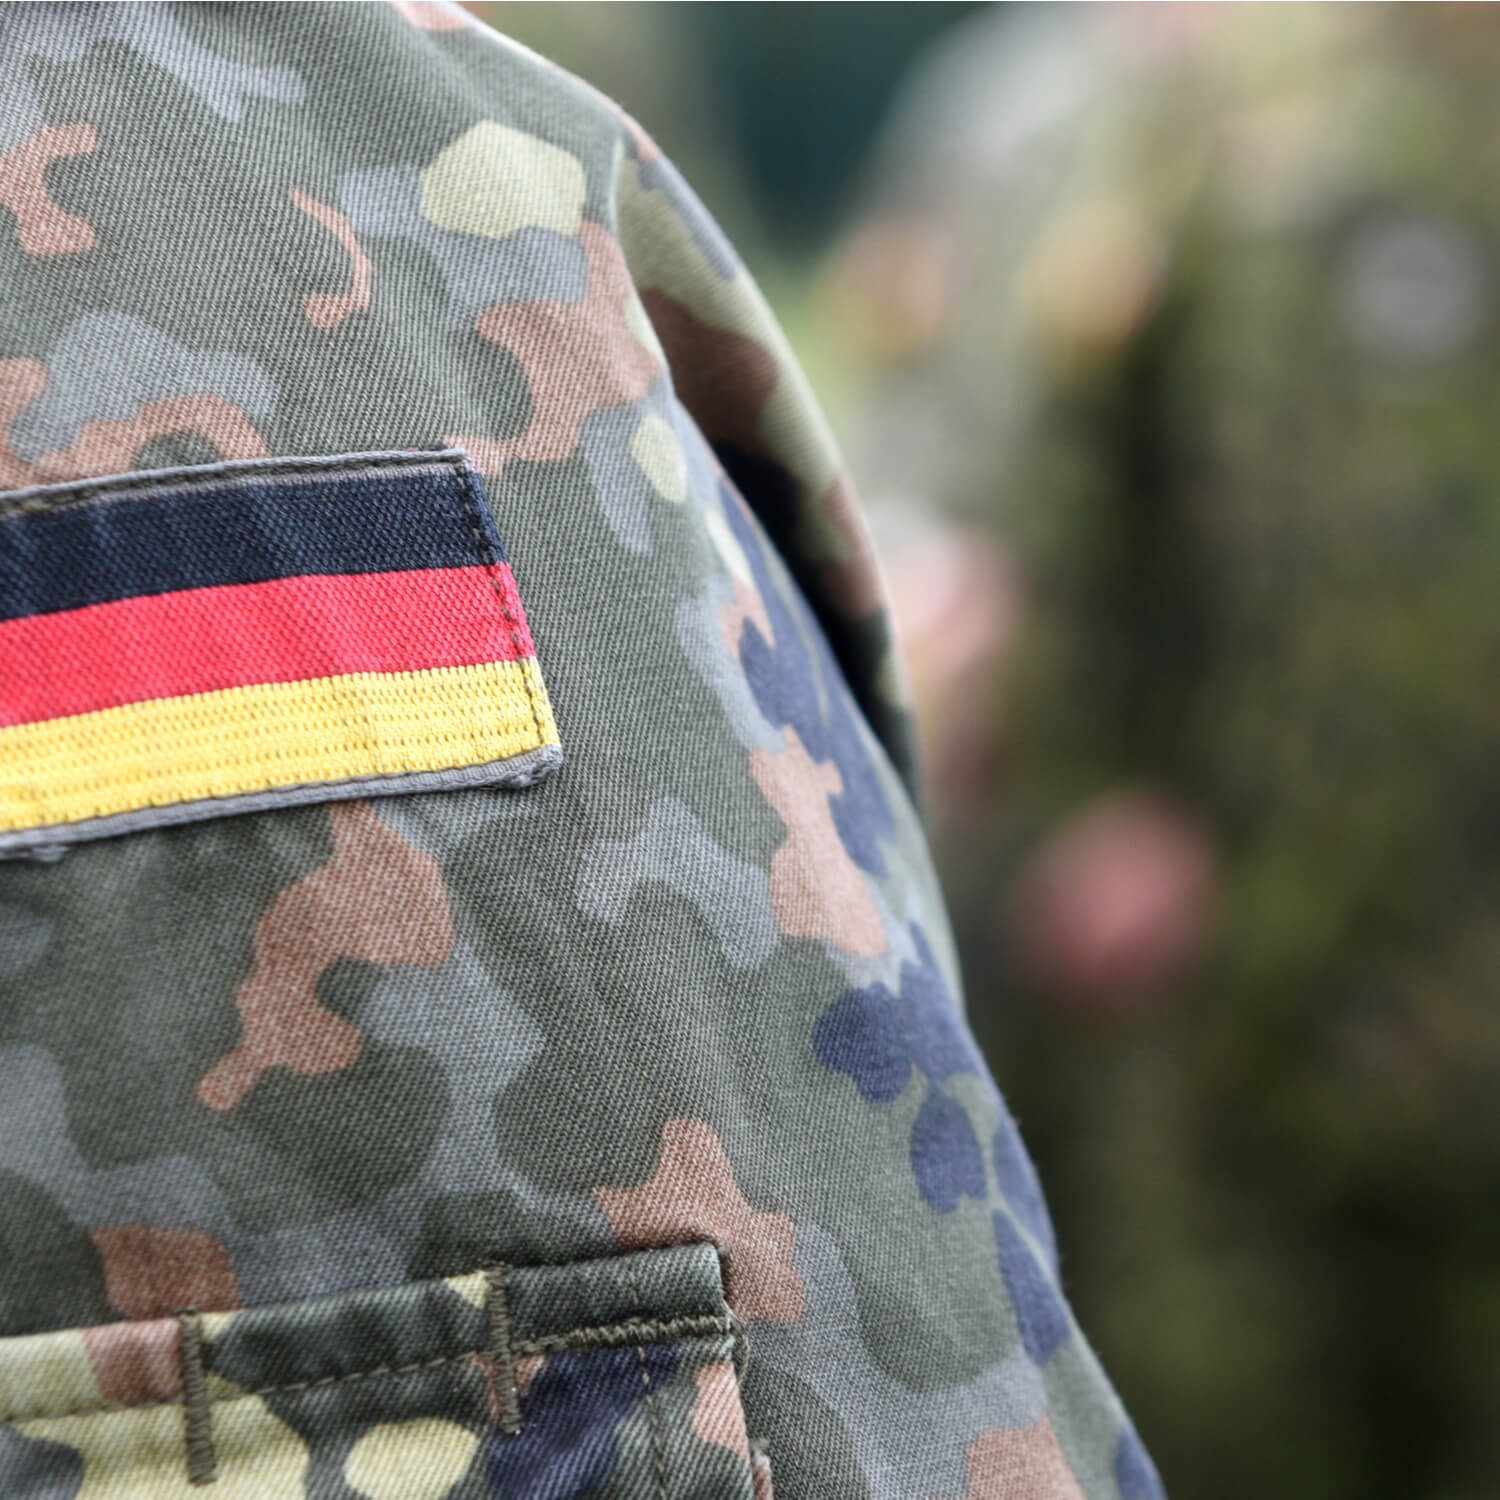 Responsibility or restraint? German security policy in 2021, with Ulrike Franke